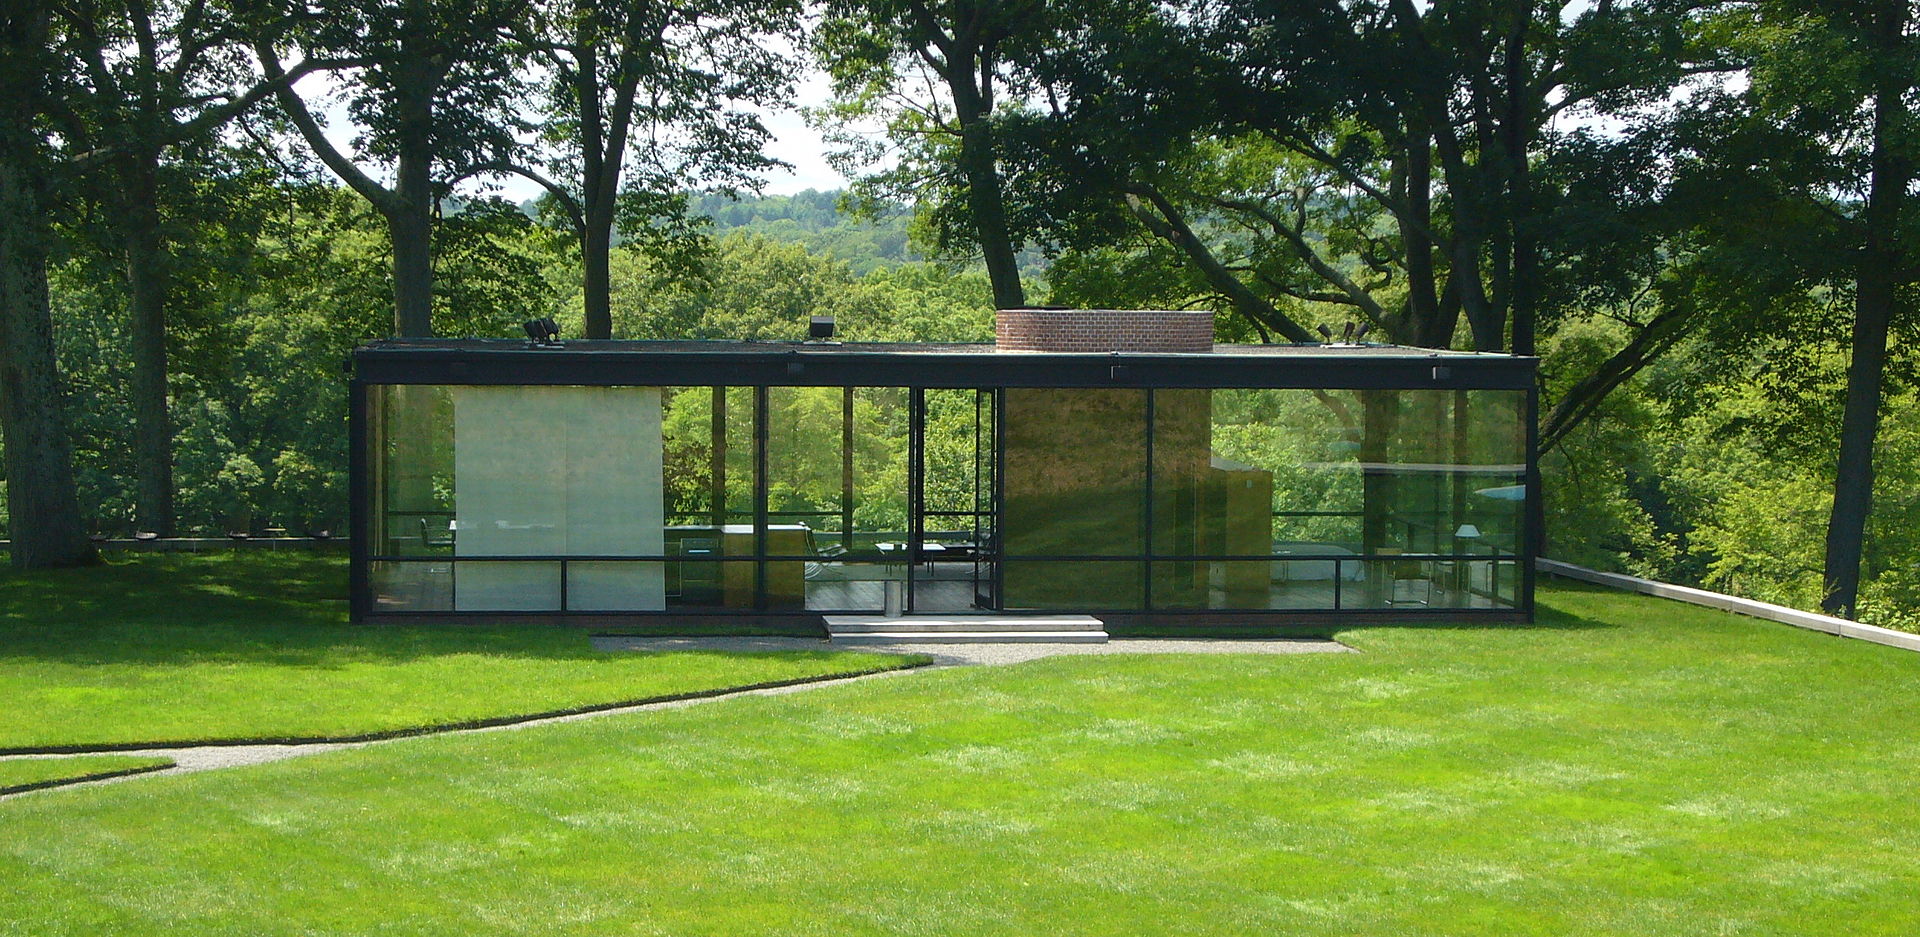 15 Works of Philip Johnson Every Architect should visit - Glass House, US